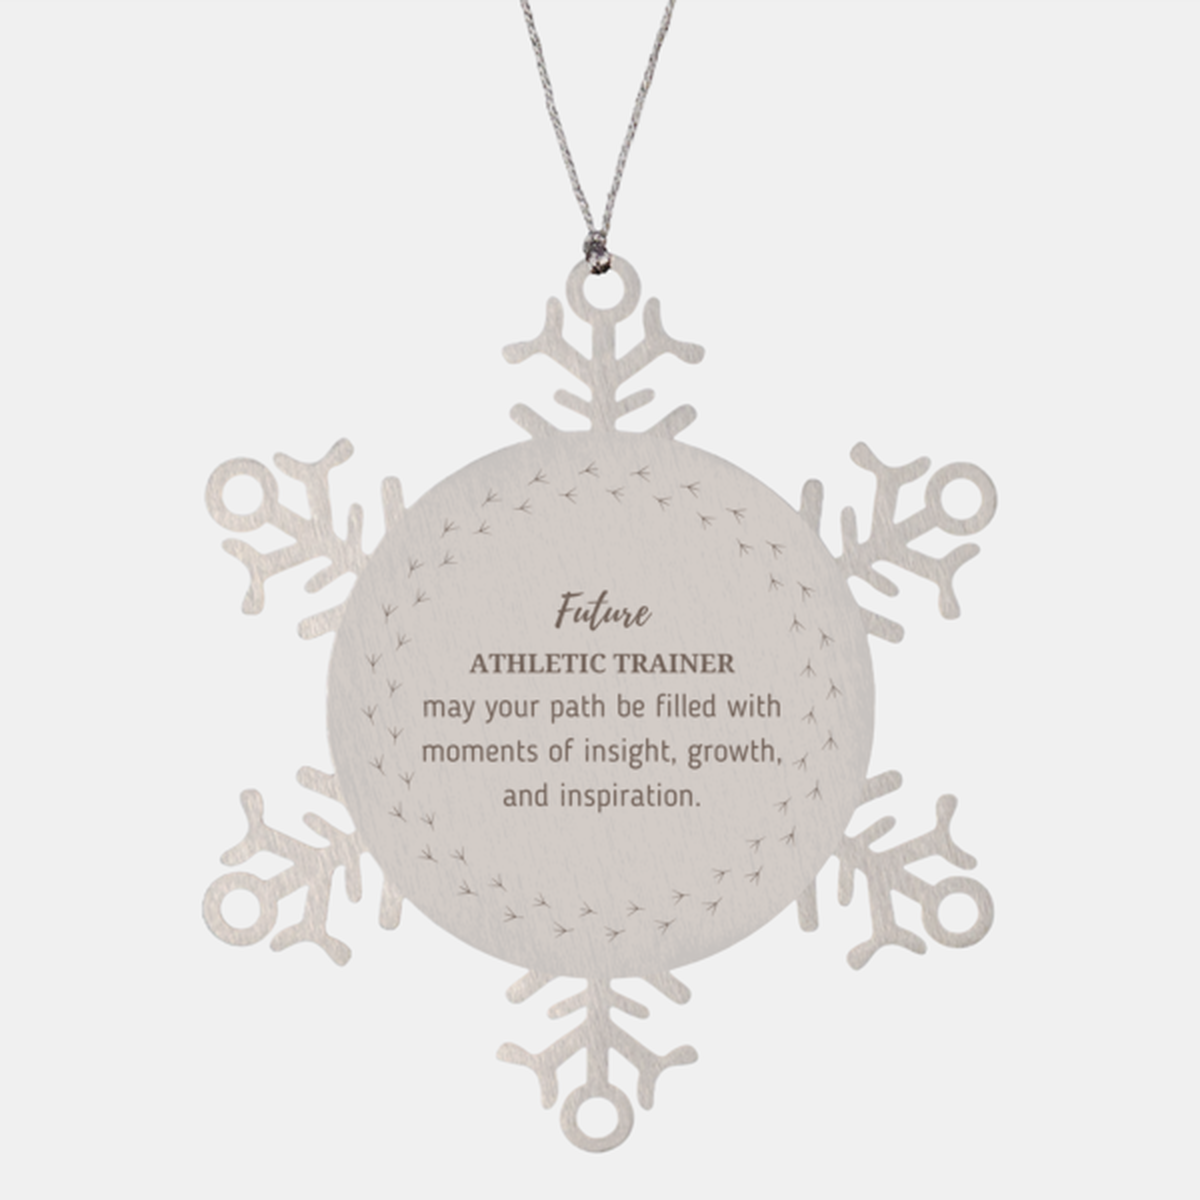 Future Athletic Trainer Gifts, May your path be filled with moments of insight, Graduation Gifts for New Athletic Trainer, Christmas Unique Snowflake Ornament For Men, Women, Friends